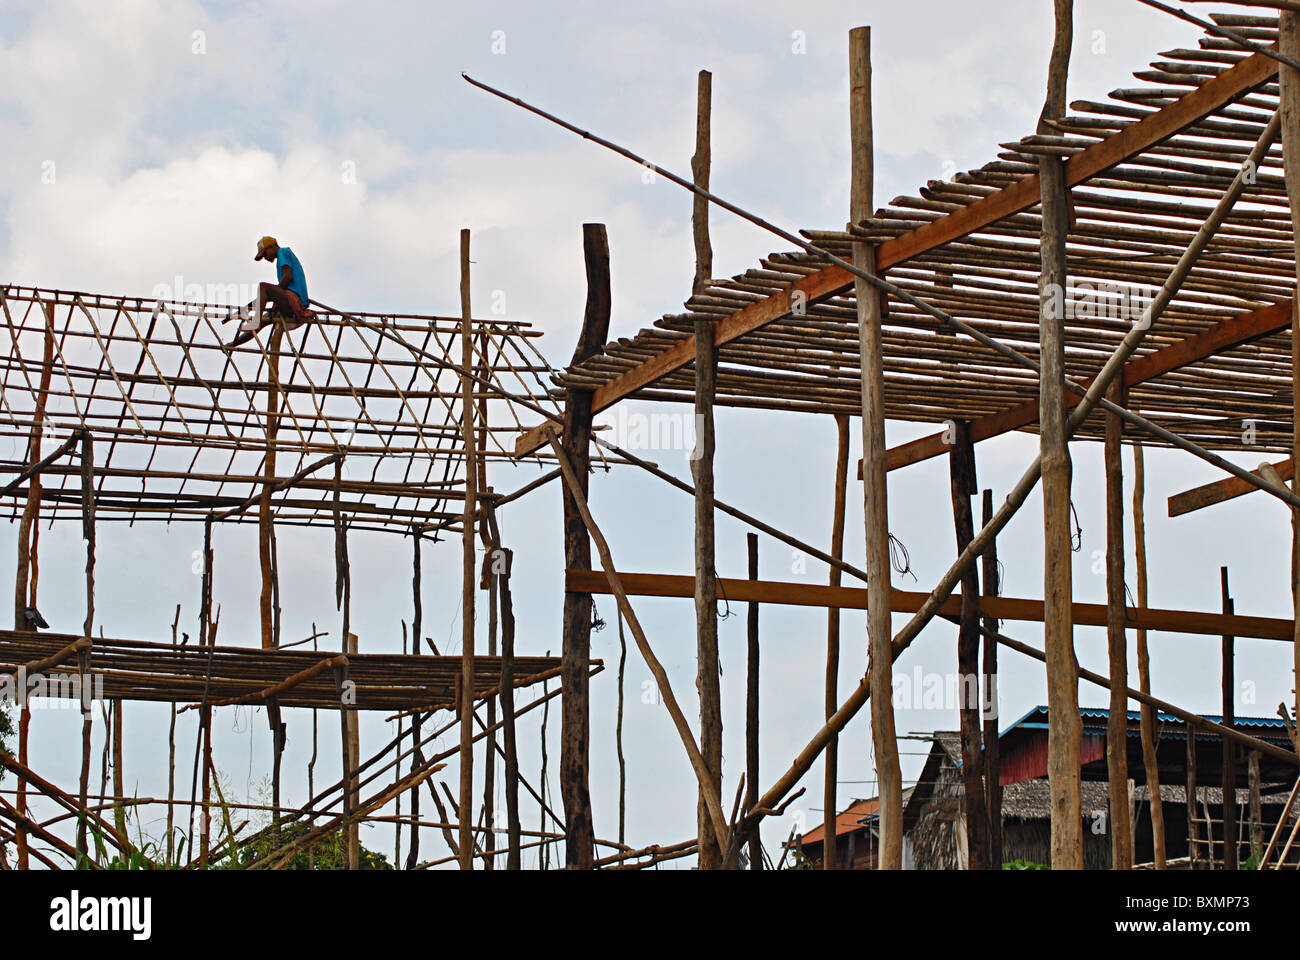 Man building houses in Kompong Khleang, Cambodia Stock Photo